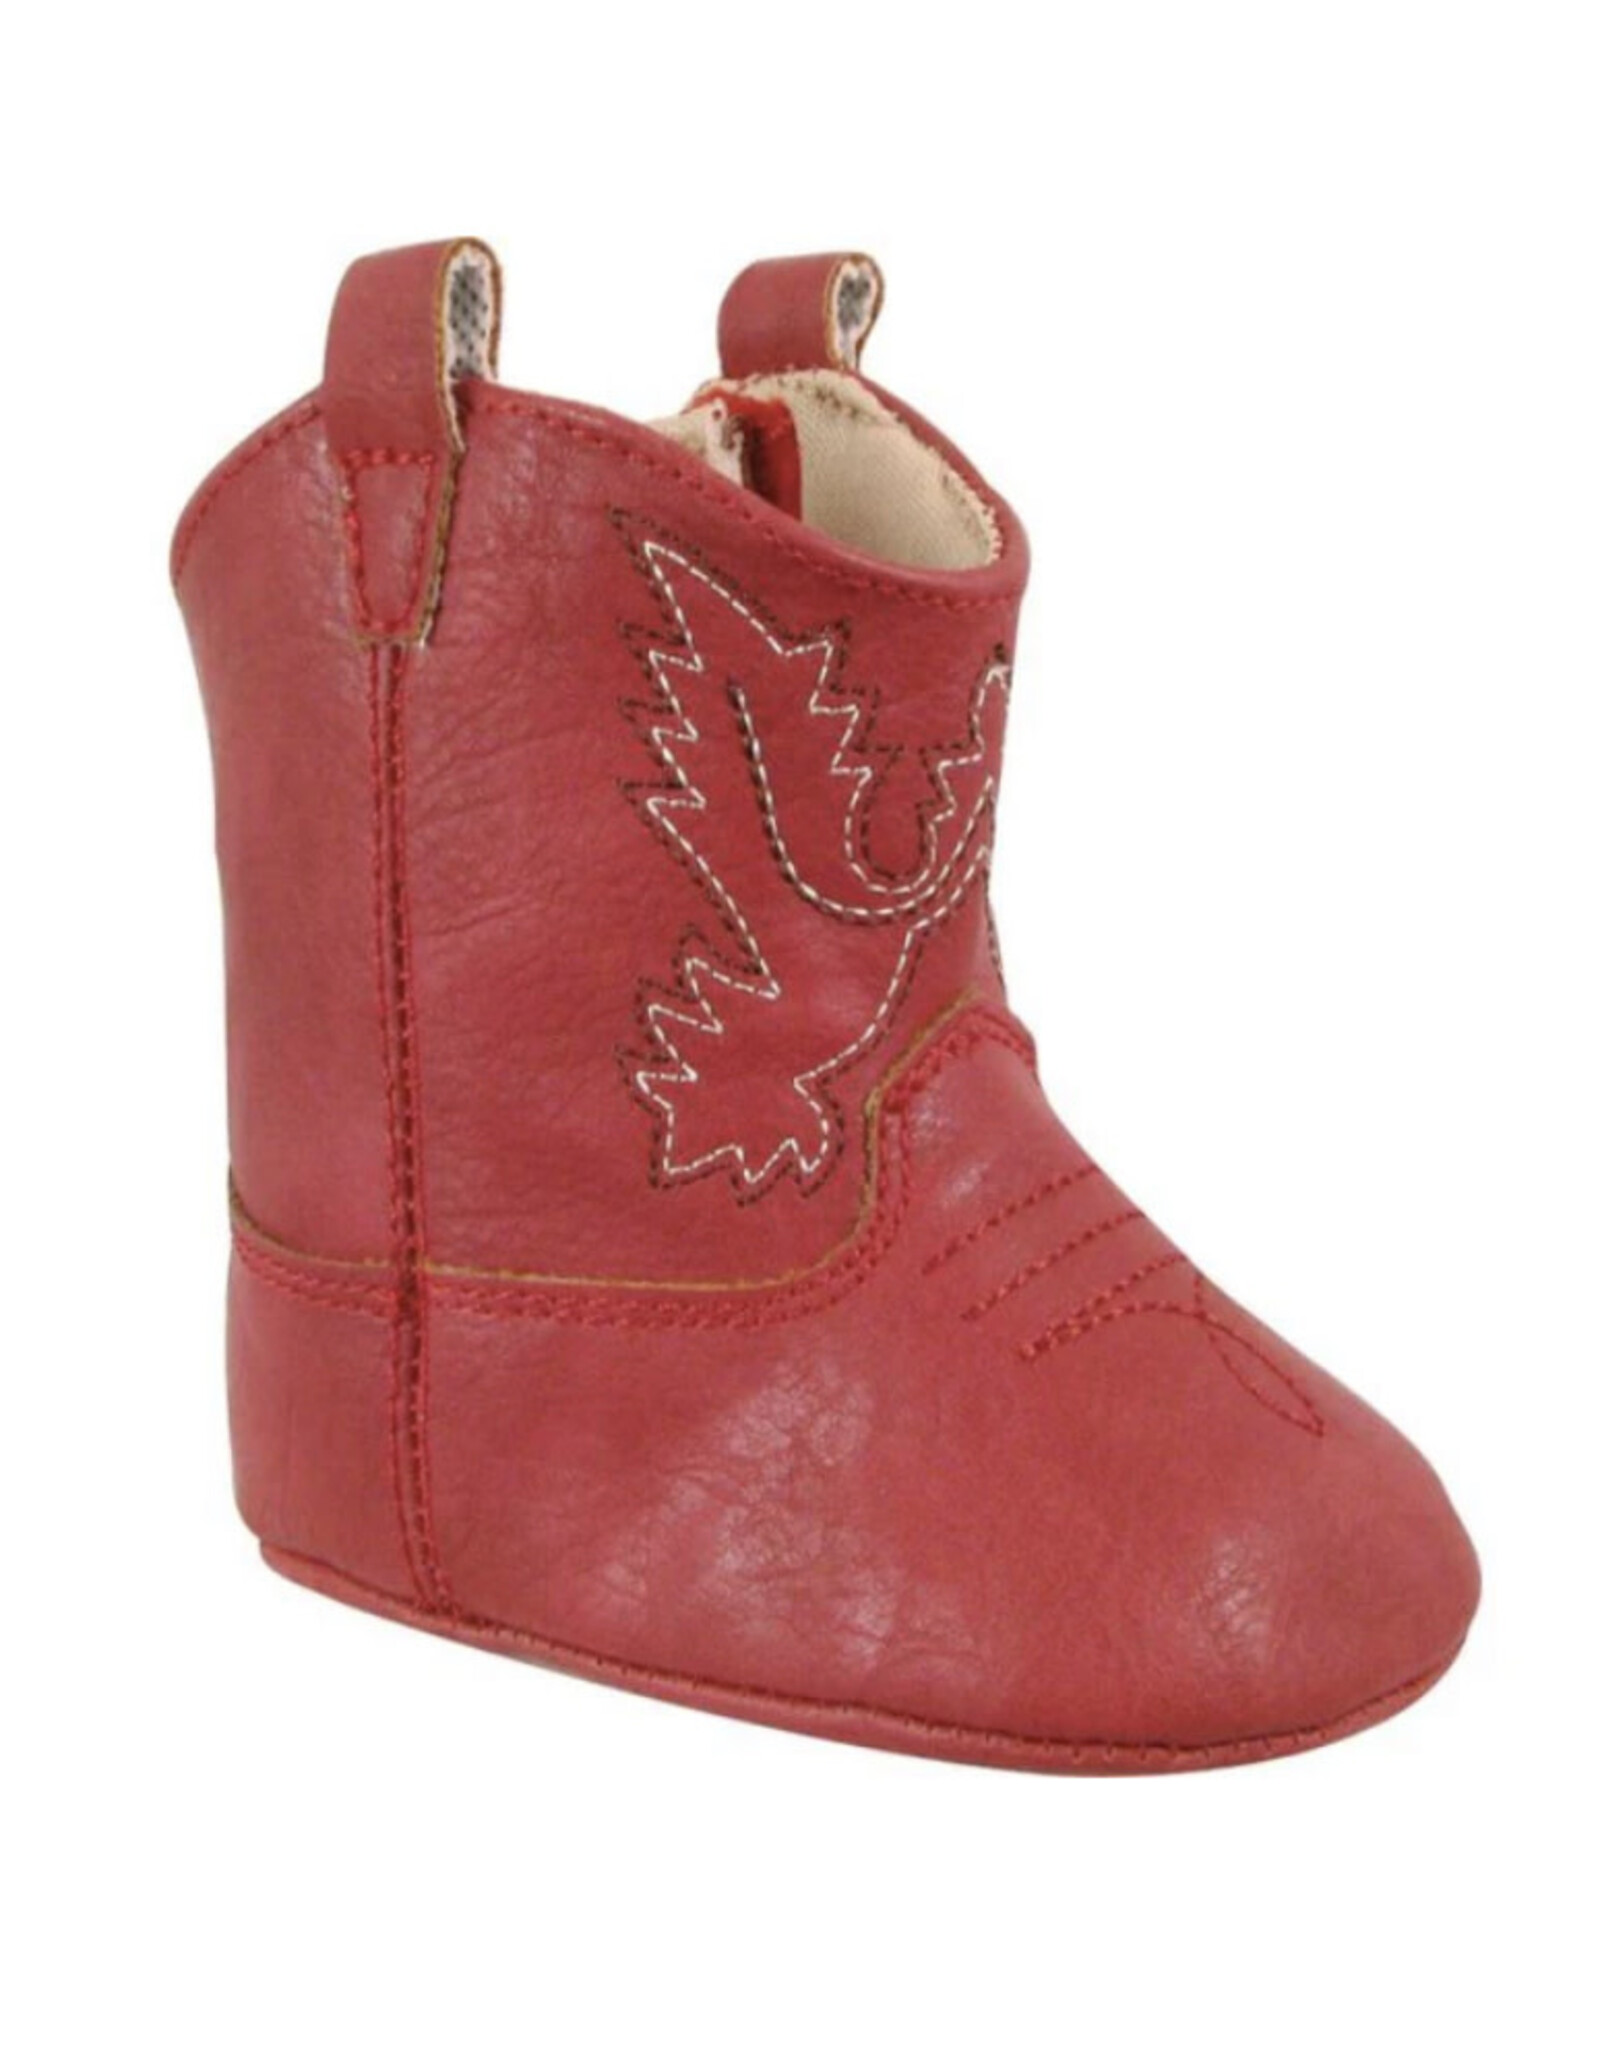 Baby Deer- Red Soft Sole Western Boots